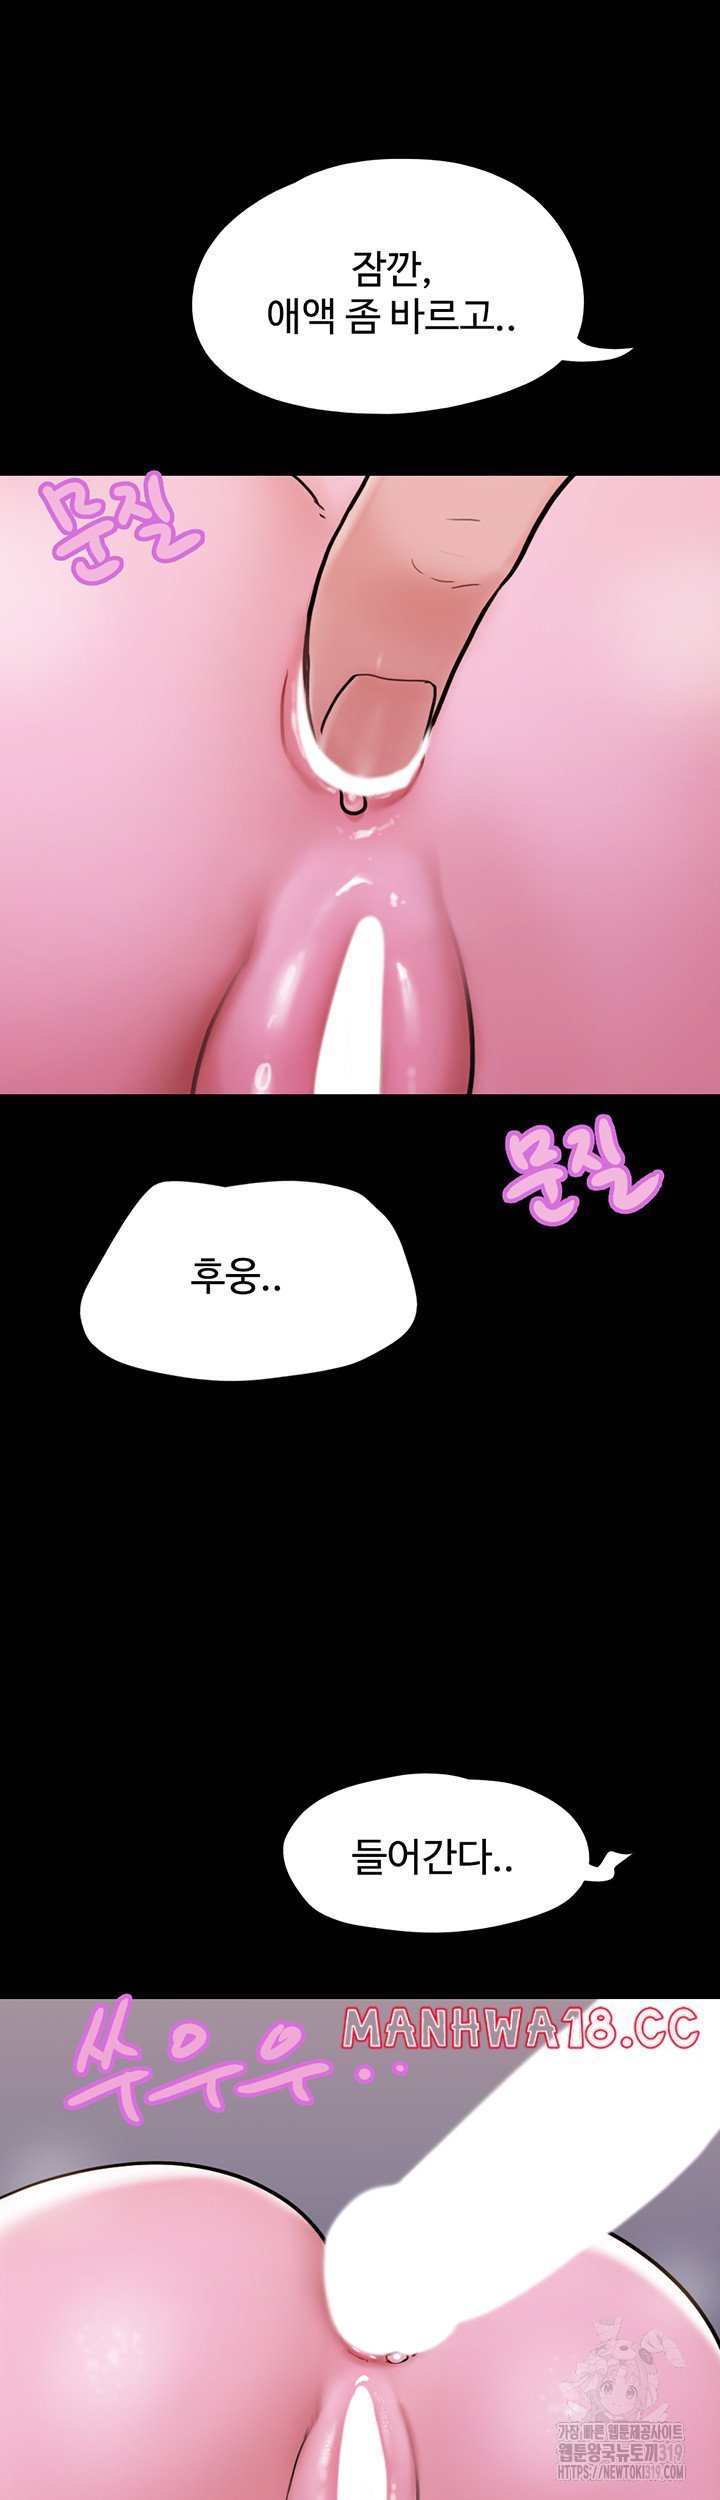 not-to-be-missed-raw-chap-37-37